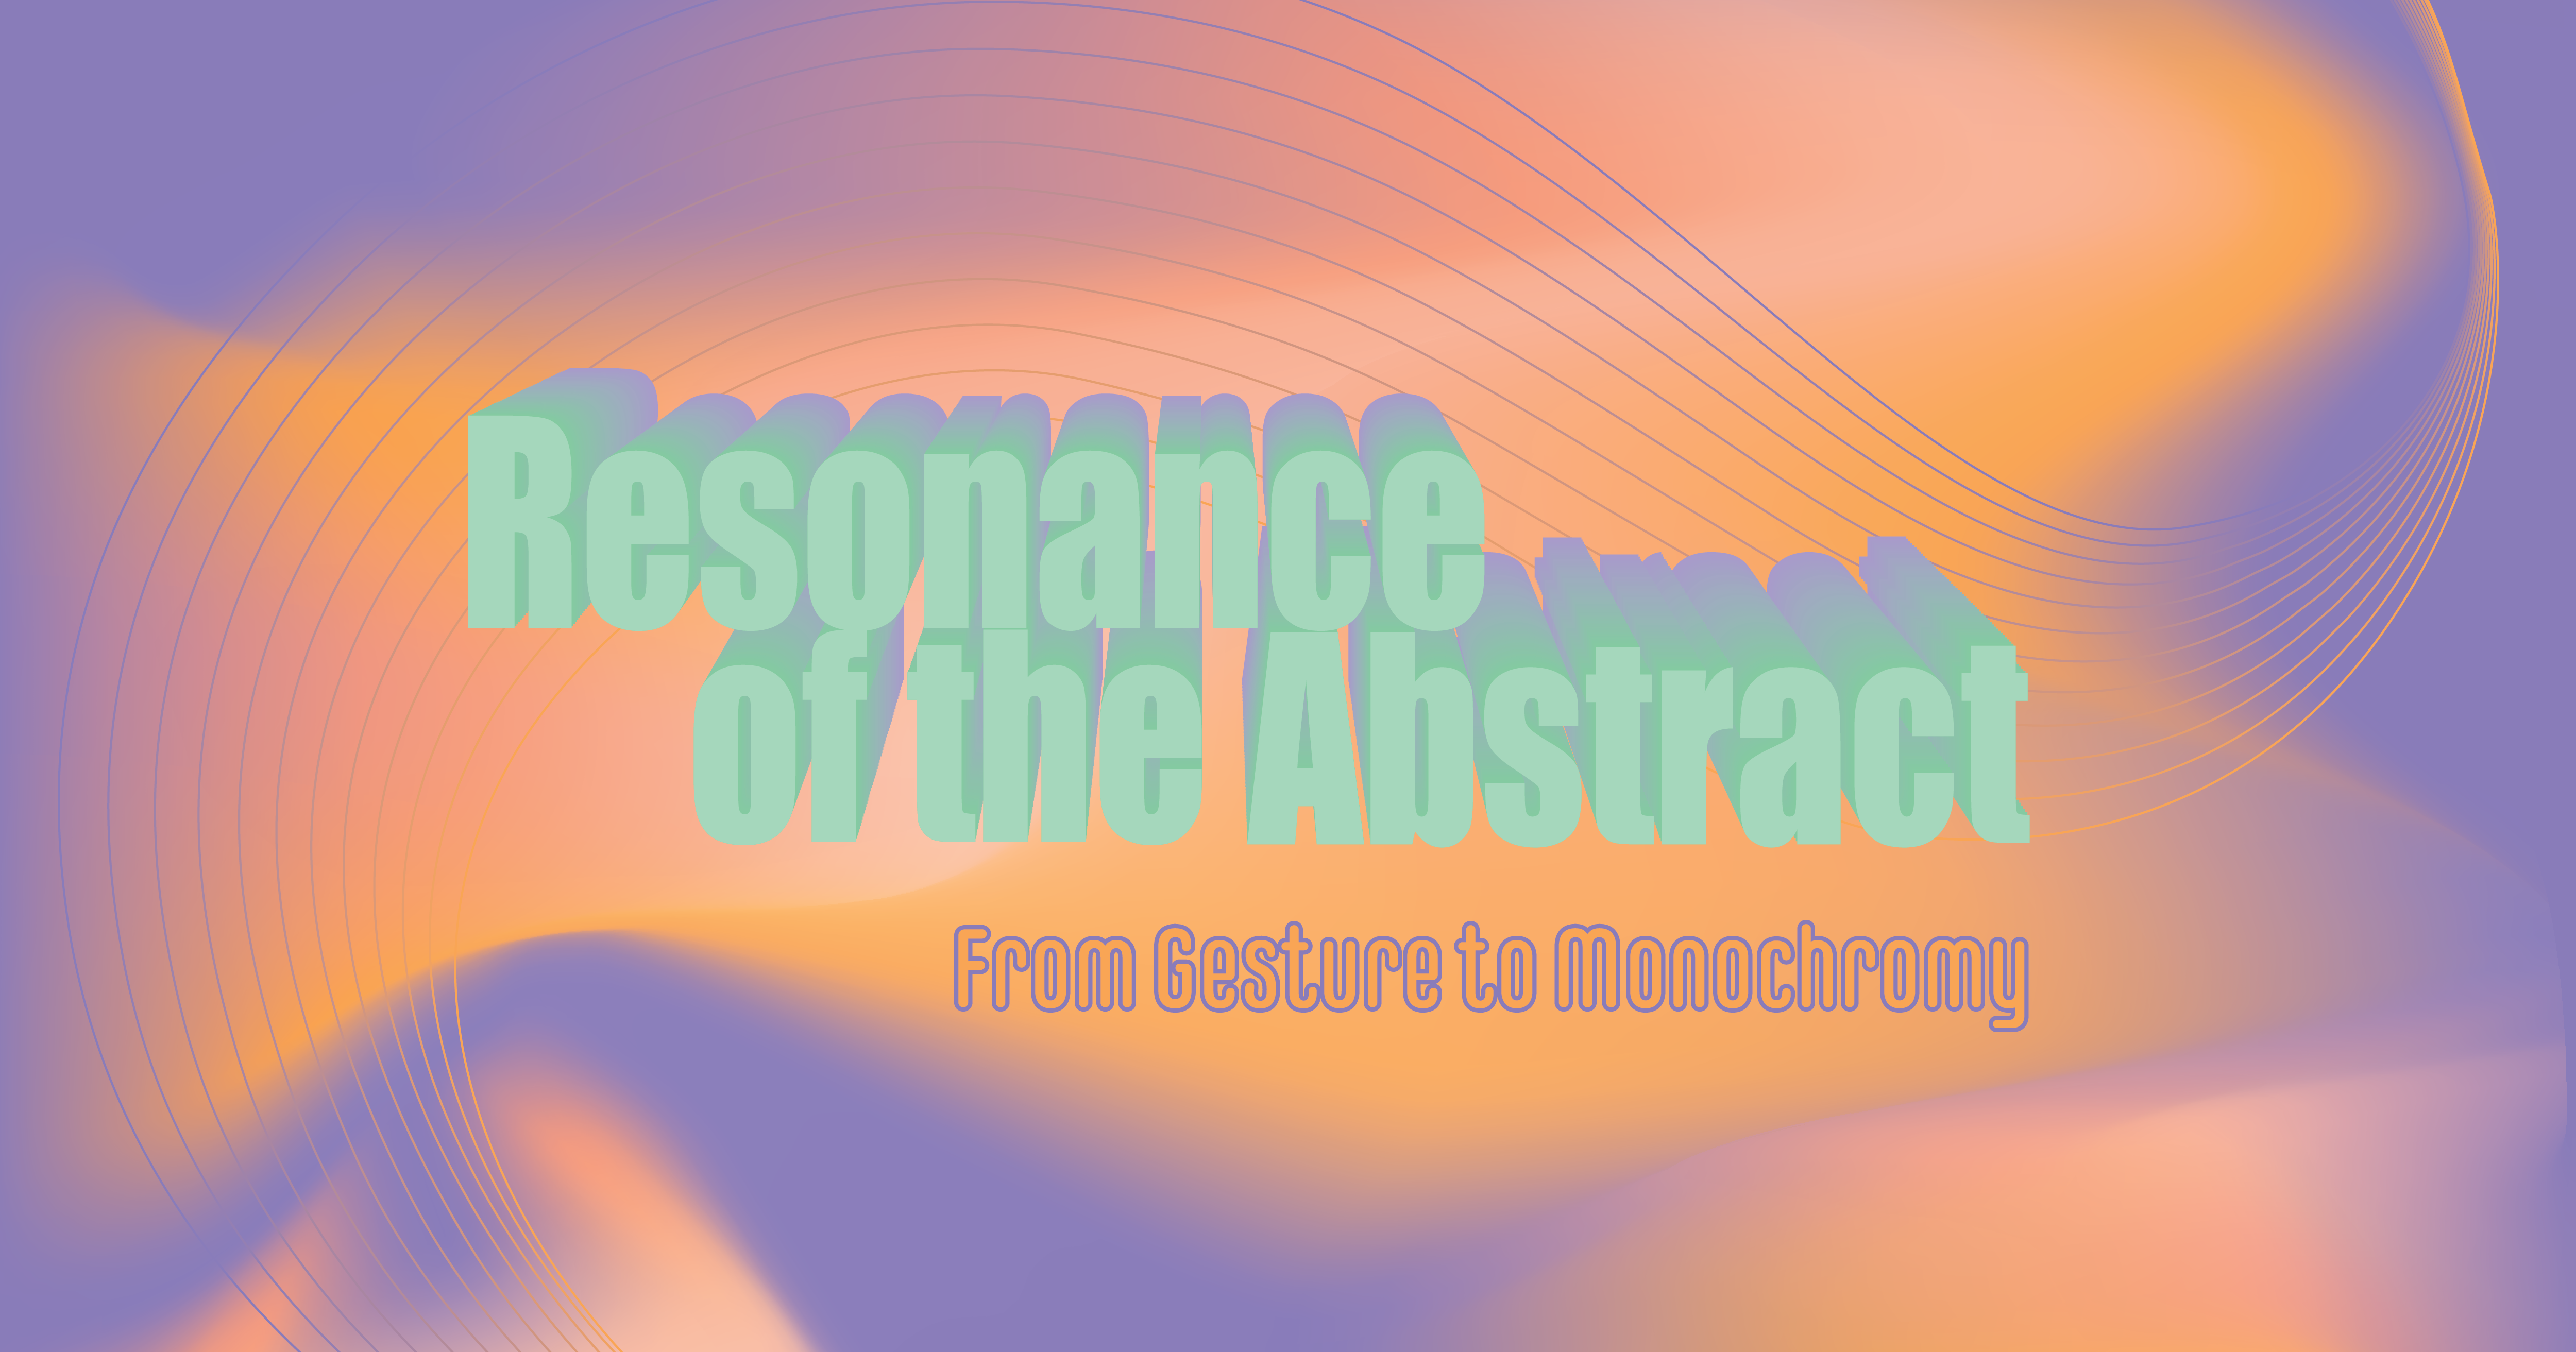 Resonance of the Abstract: From Gesture to Monochromy